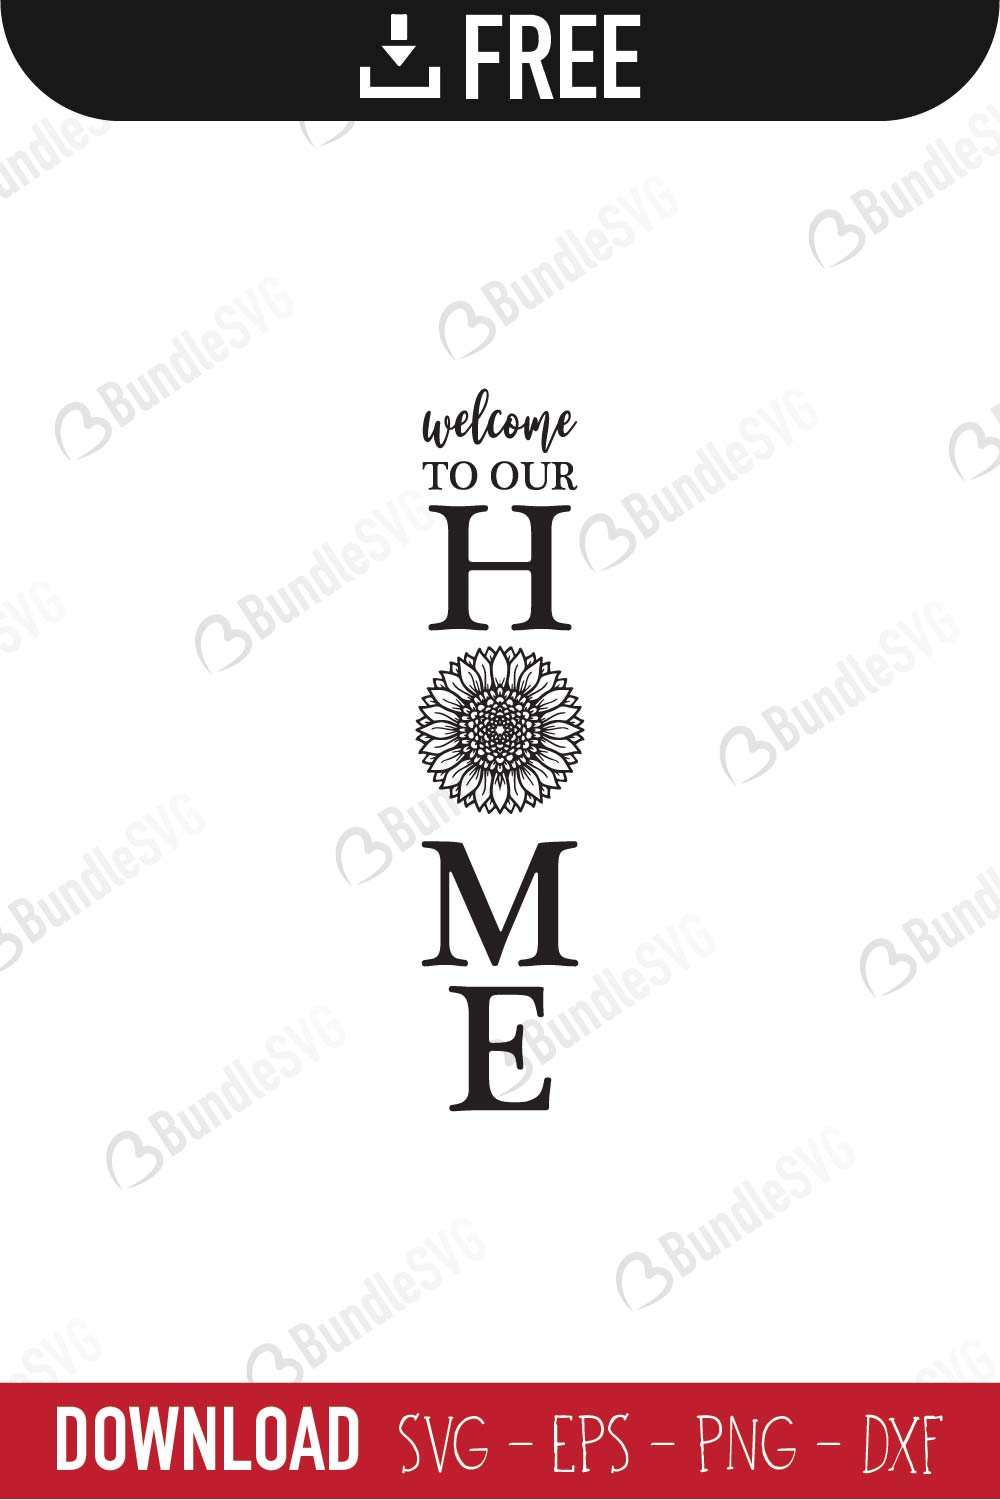 welcome, our home, sunflower, porch, sign, front door design, free, svg free, svg cut files free, download, shirt design, cut file,